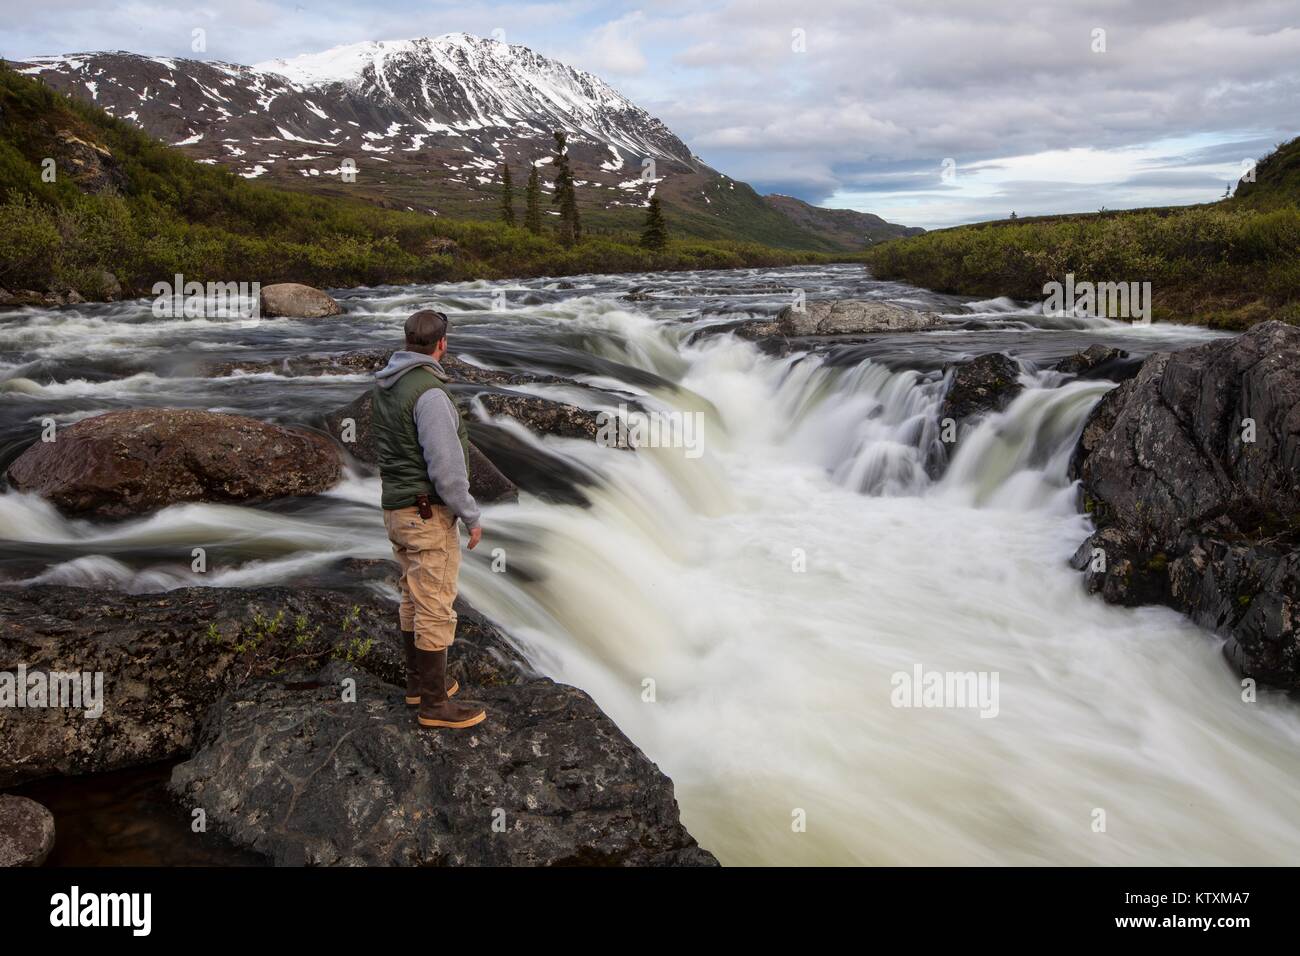 A hiker looks out on the Delta Wild and Scenic River June 19, 2014 in Alaska. Stock Photo